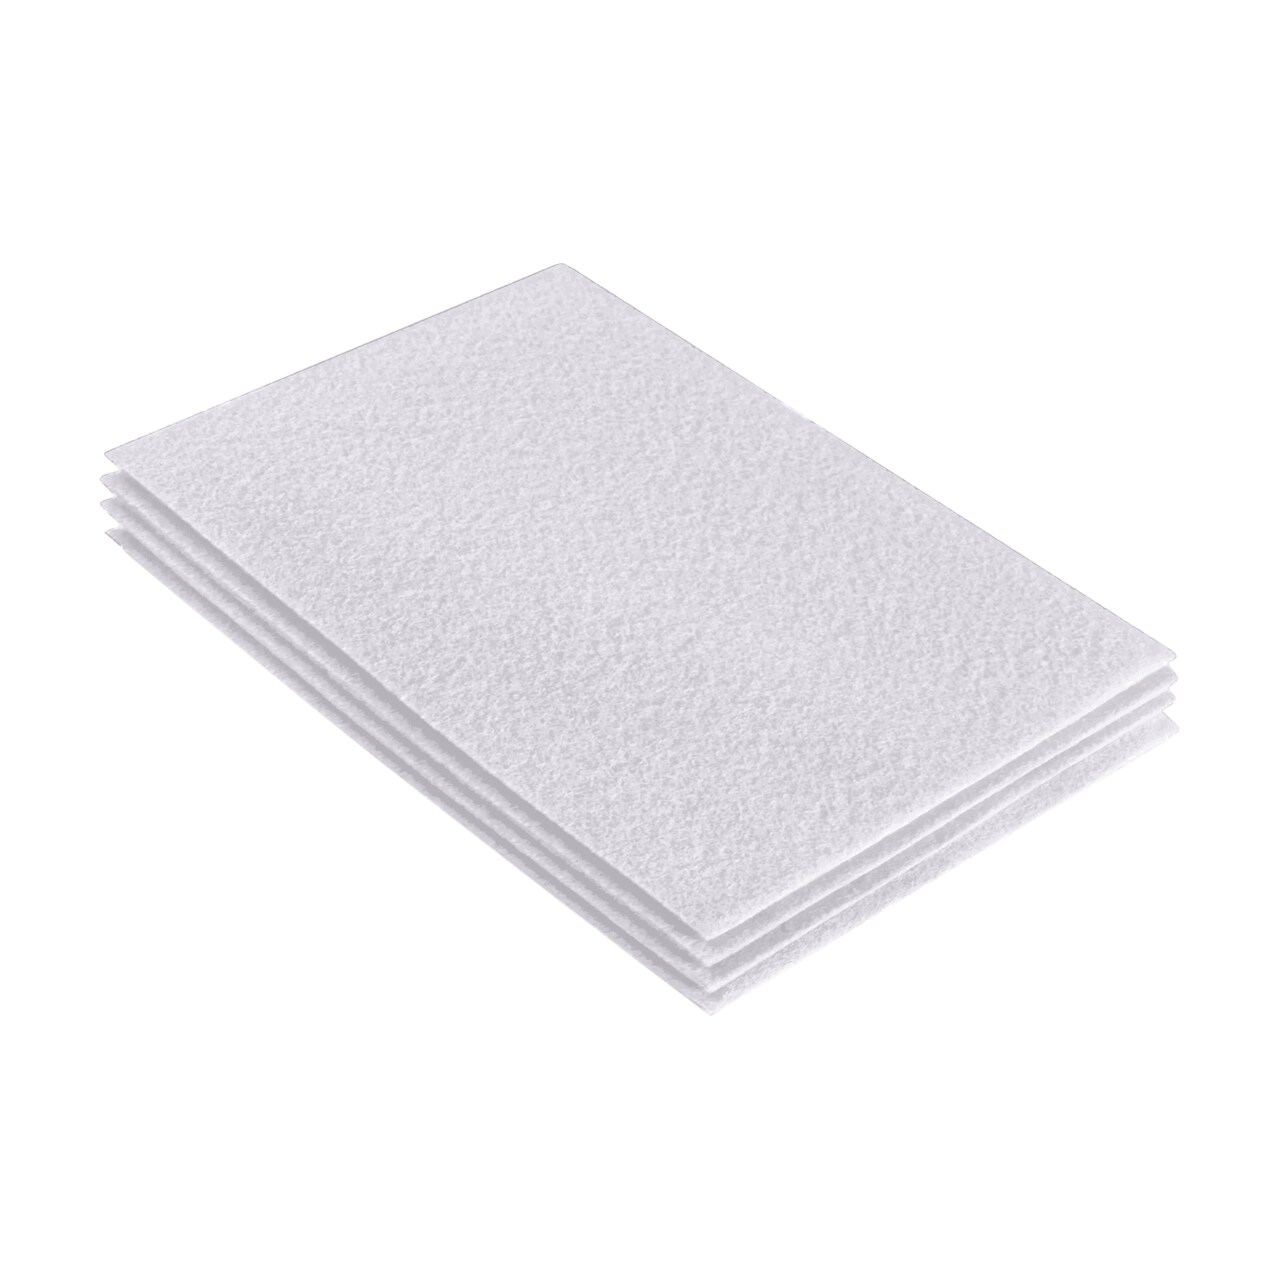 FabricLA Acrylic Felt Sheets for Crafts - Precut 9 X 12 Inches (20 cm X  30 cm) Felt Squares - Use Felt Fabric Craft Sheets for DIY, Hobby, Costume,  and Decoration, White